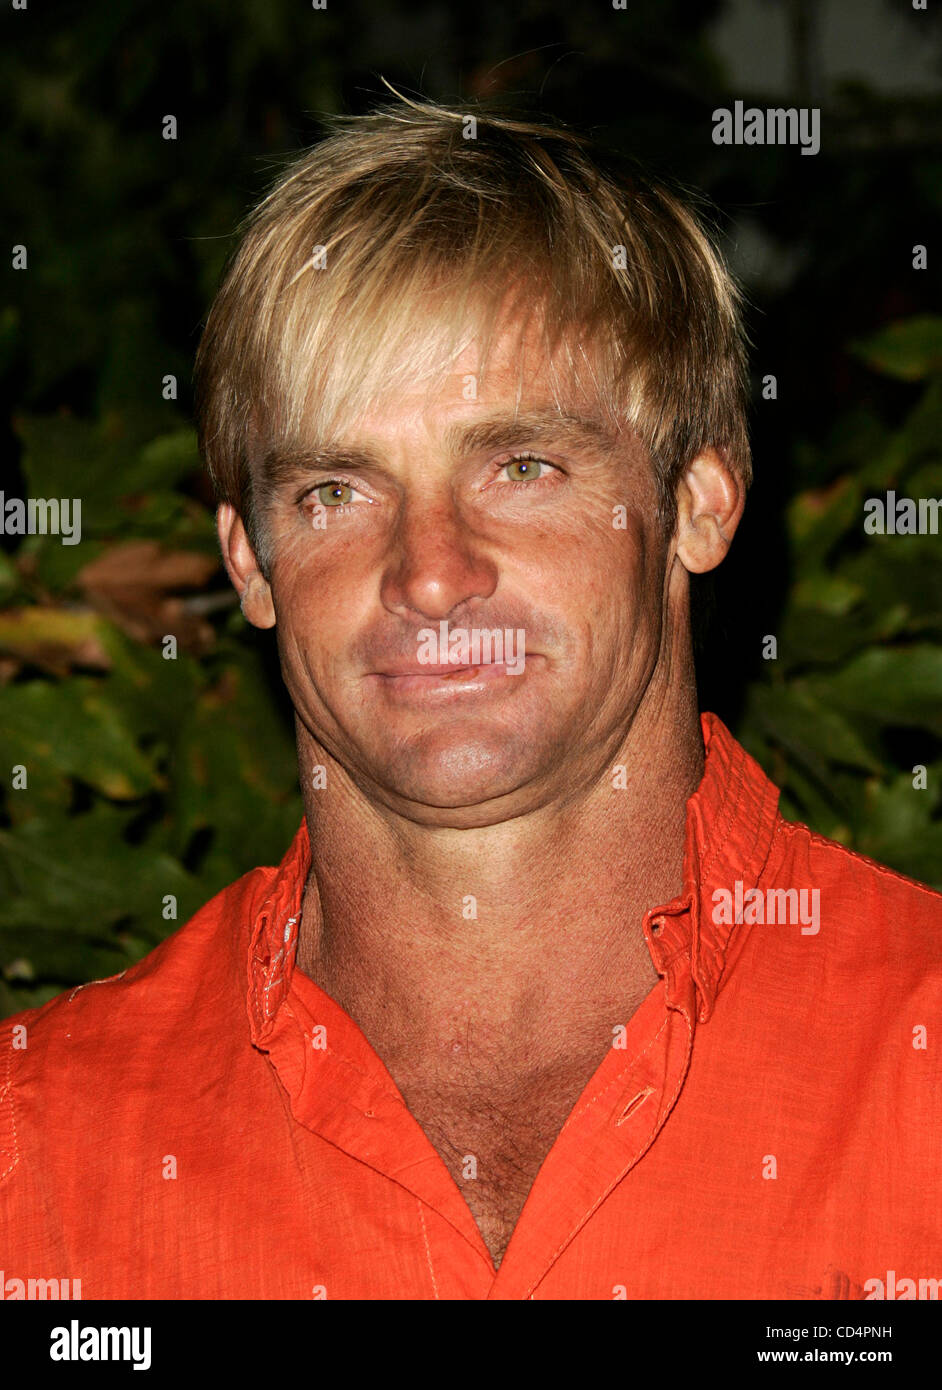 Oct 18, 2008 - Pacific Palisades, California, USA - Surfer LAIRD HAMILTON arriving to the Oceana's Annual Partners Award Gala held at a private home. (Credit Image: © Lisa O'Connor/ZUMA Press) Stock Photo